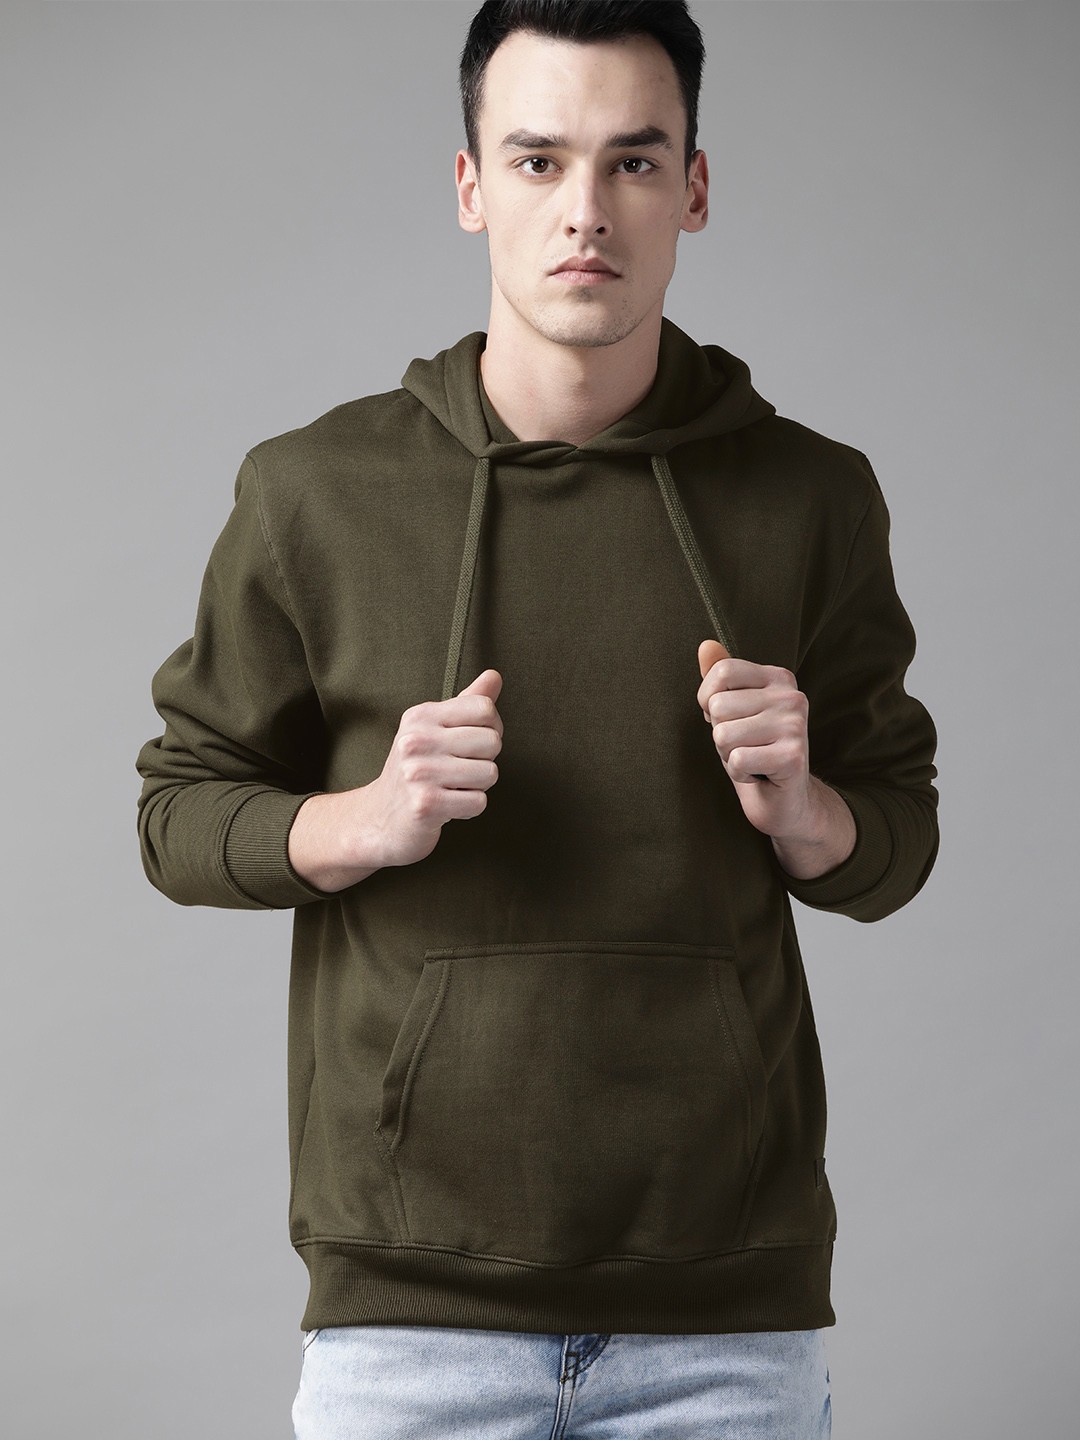 Buy The Roadster Lifestyle Co Men Olive Green Solid Hooded Sweatshirt ...